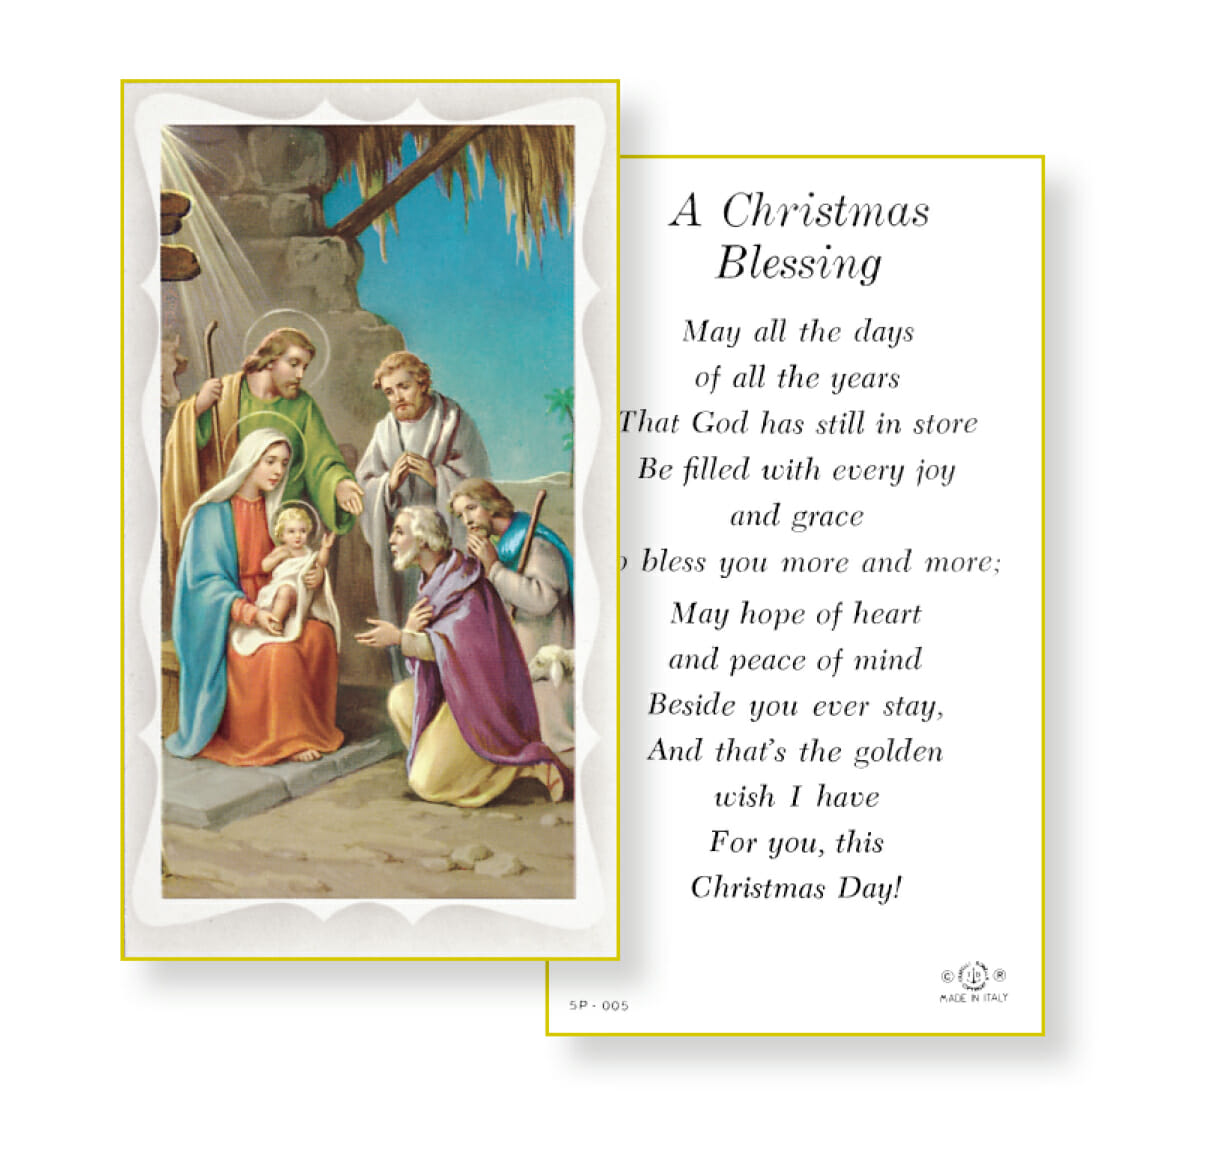 A Christmas Blessing Holy Card 100 Pack Buy Religious Catholic Store